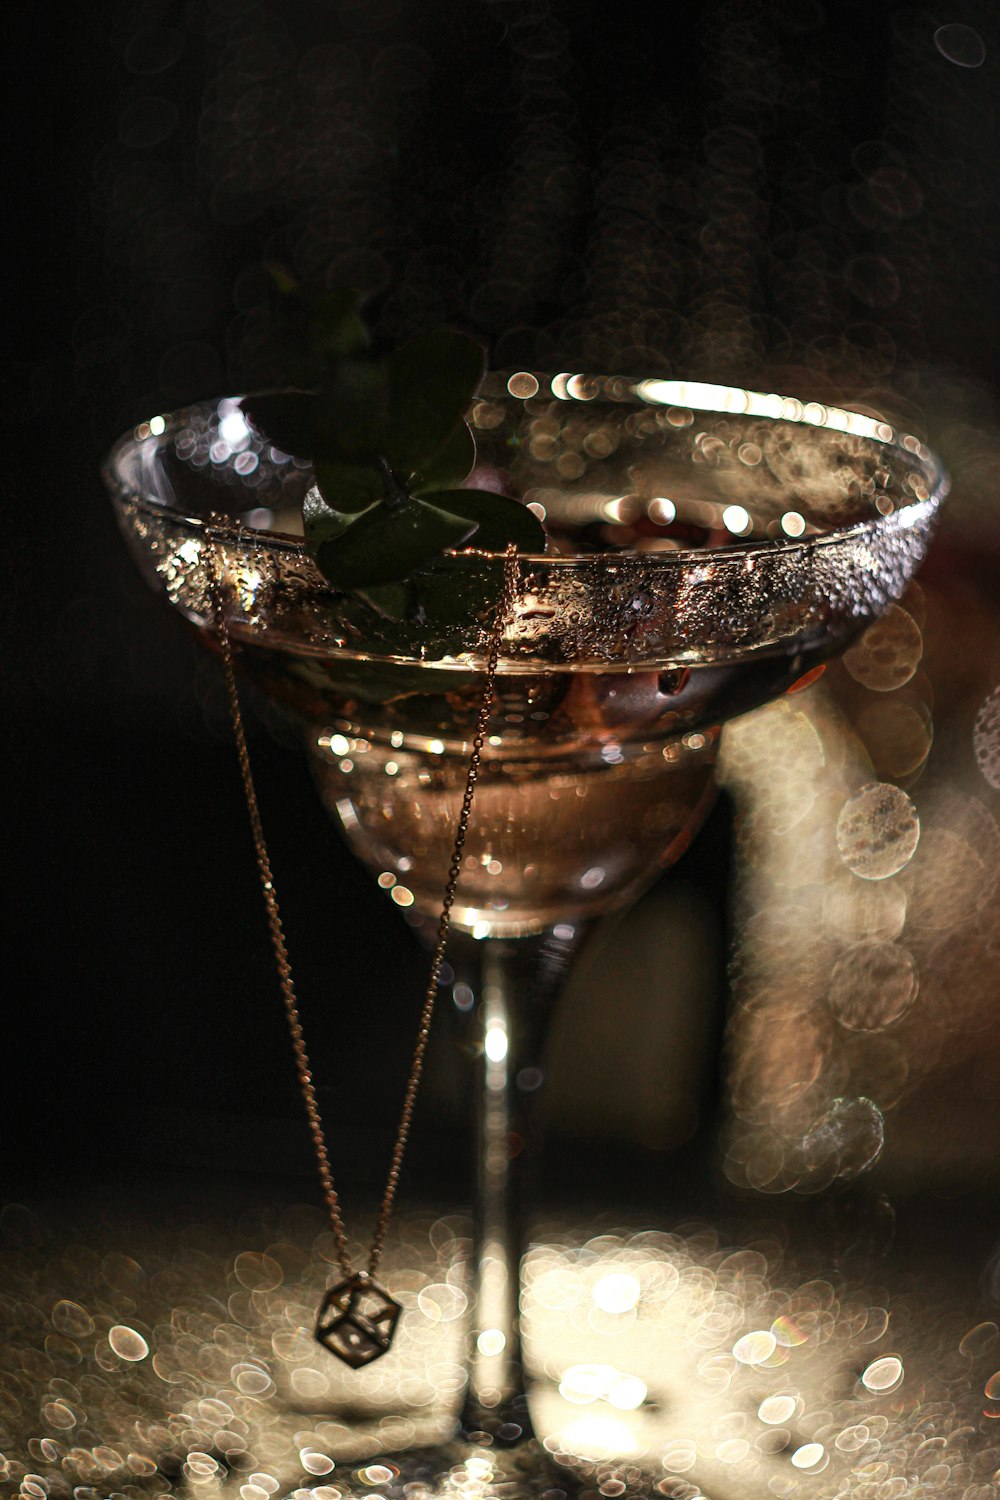 a close up of a drink in a glass on a table